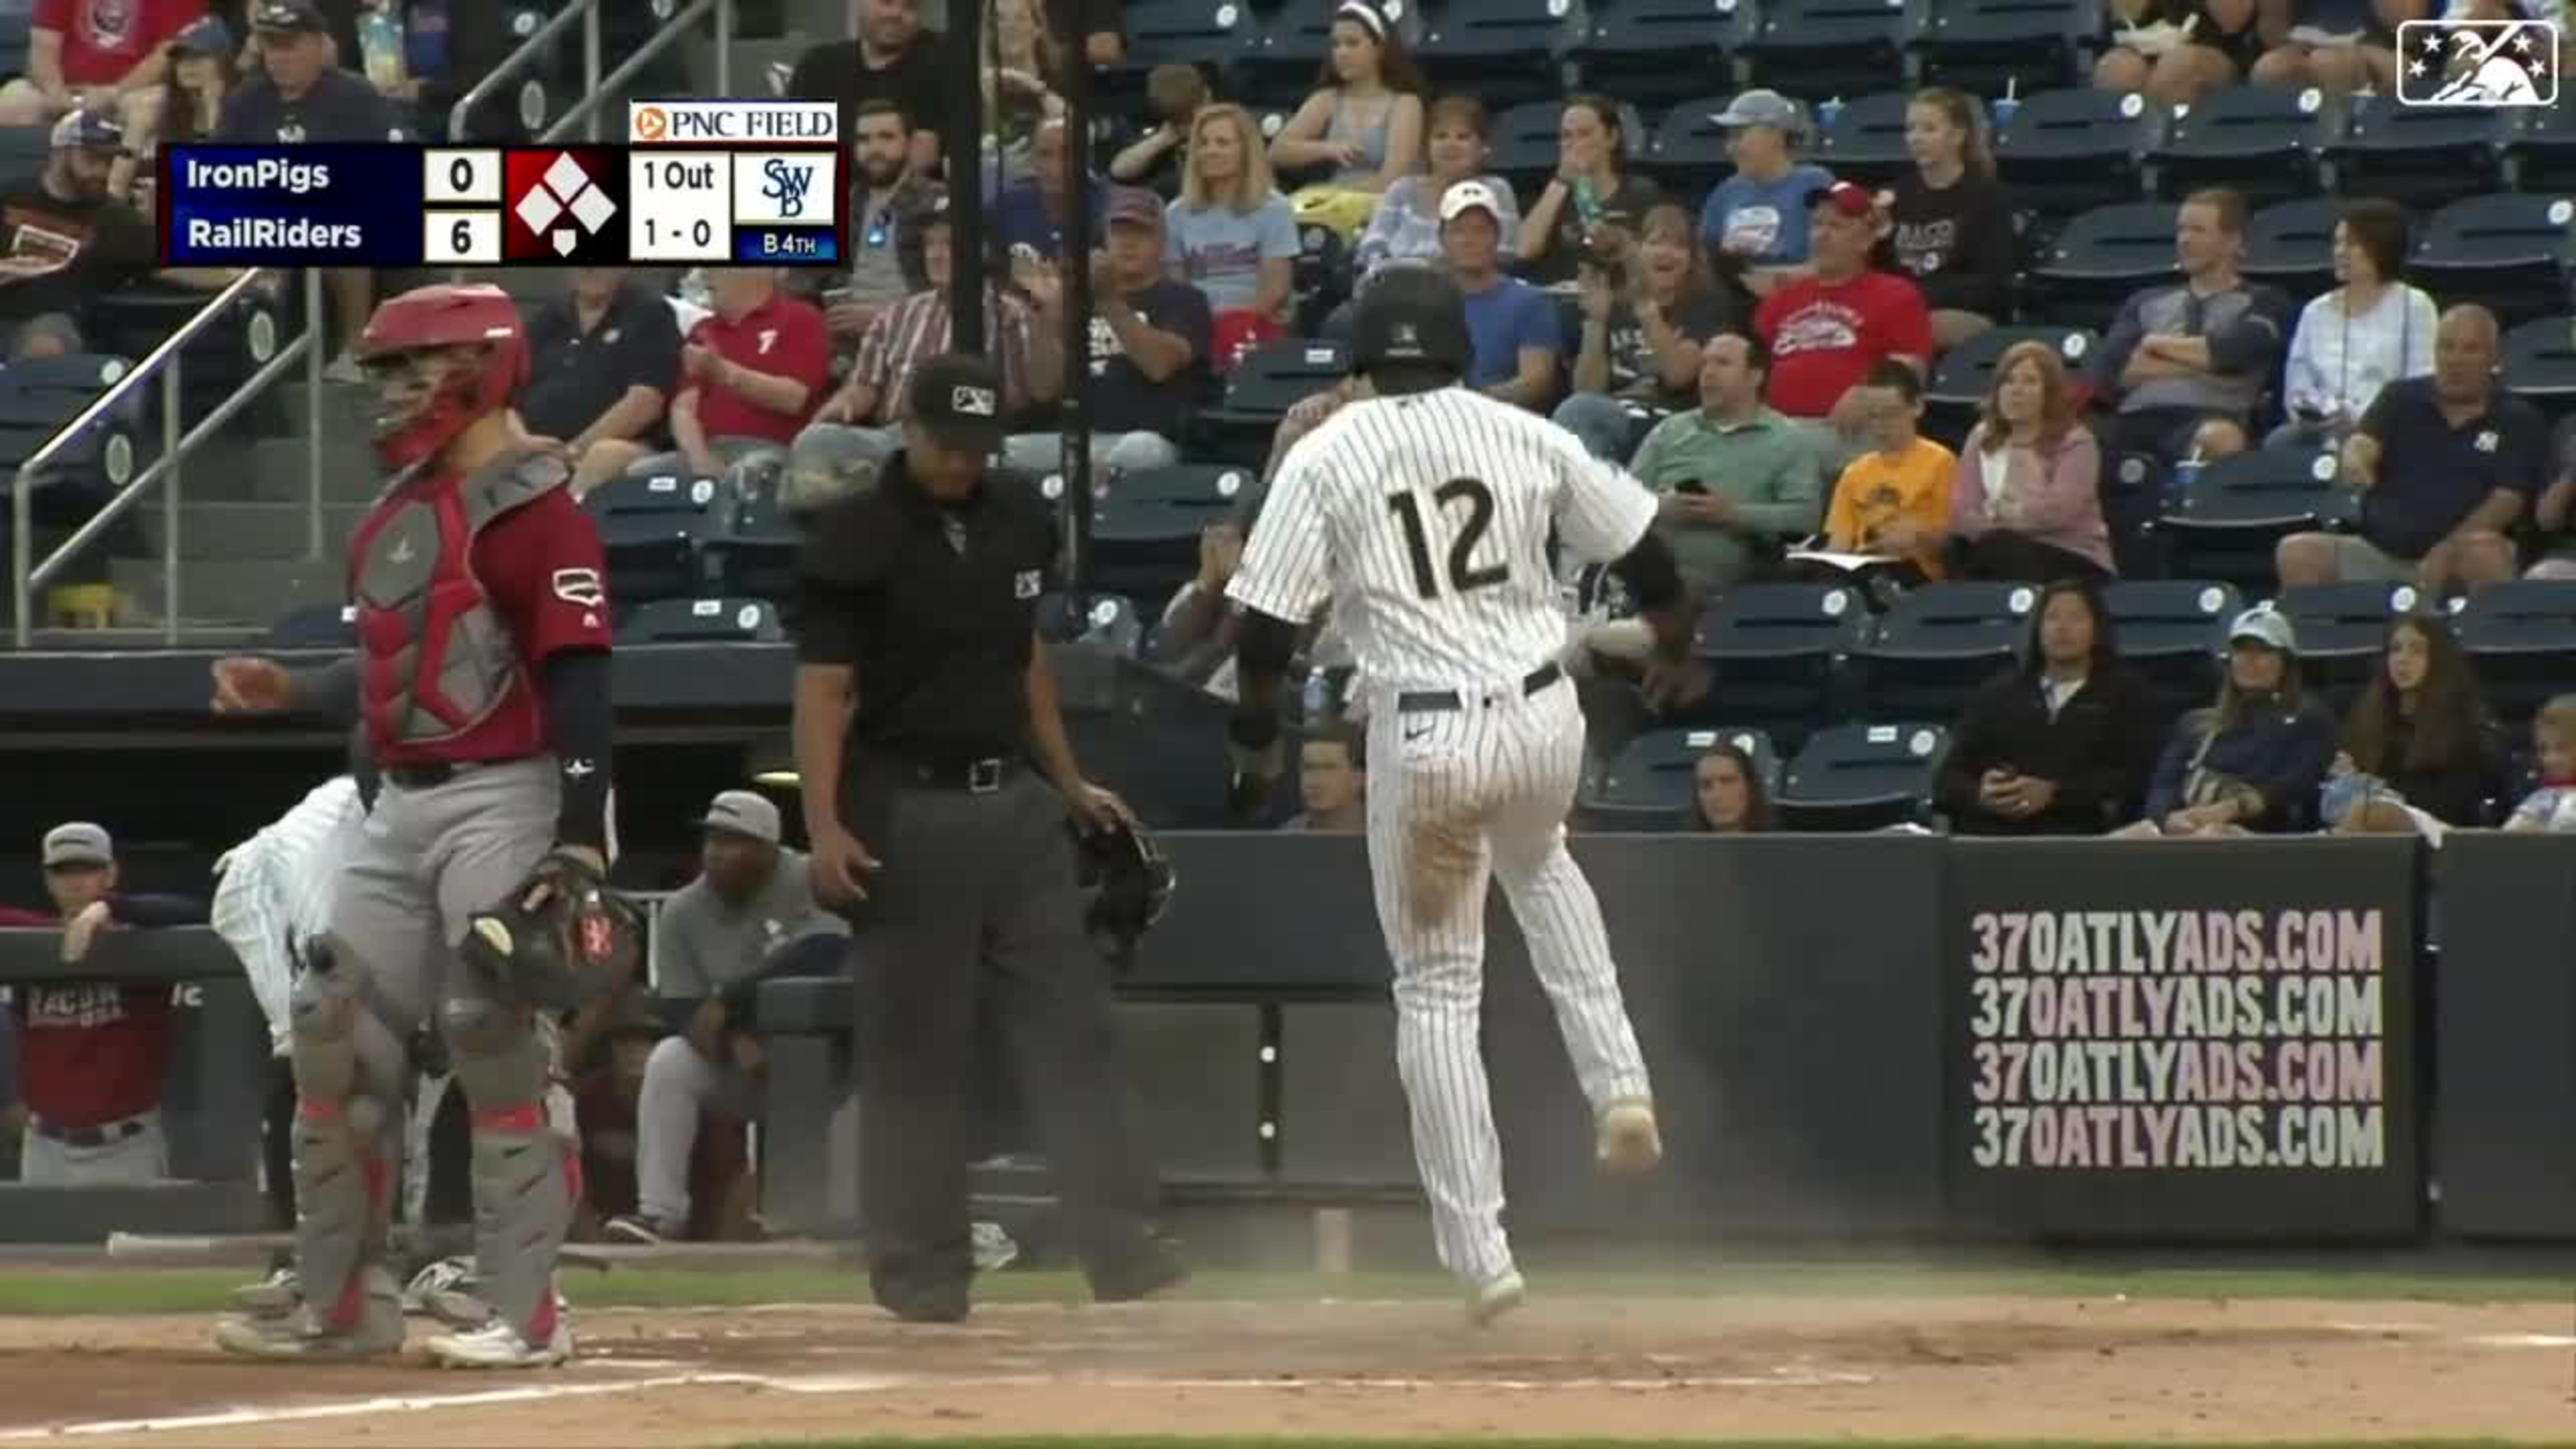 Pinstriped Performances: Dominguez's First Home Run - Pinstriped